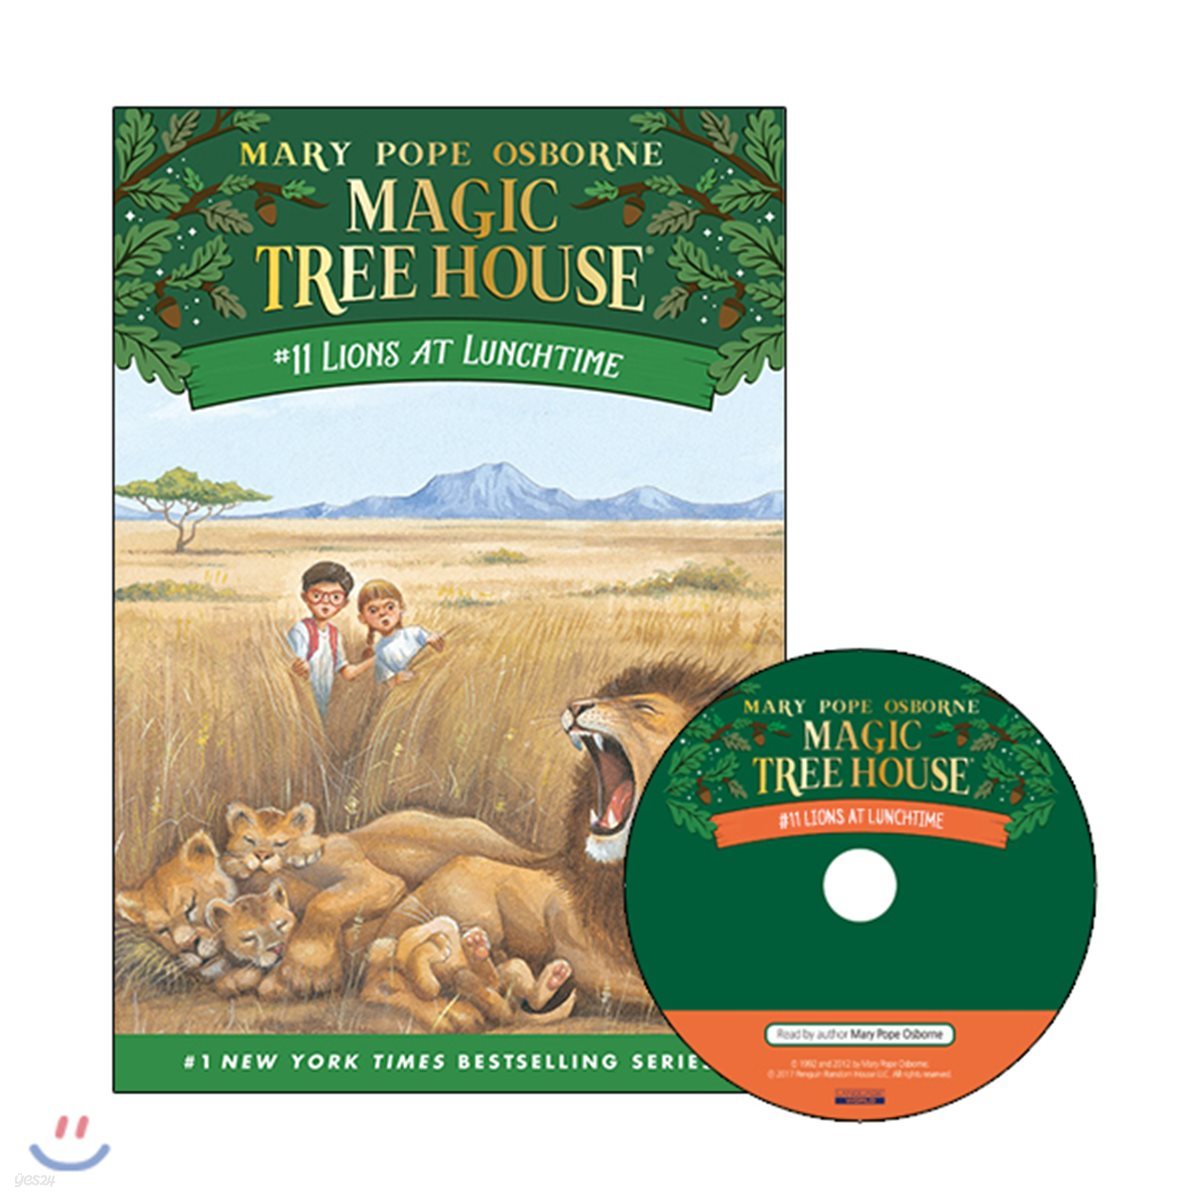 Magic Tree House #11 : Lions at Lunchtime (Book + CD)